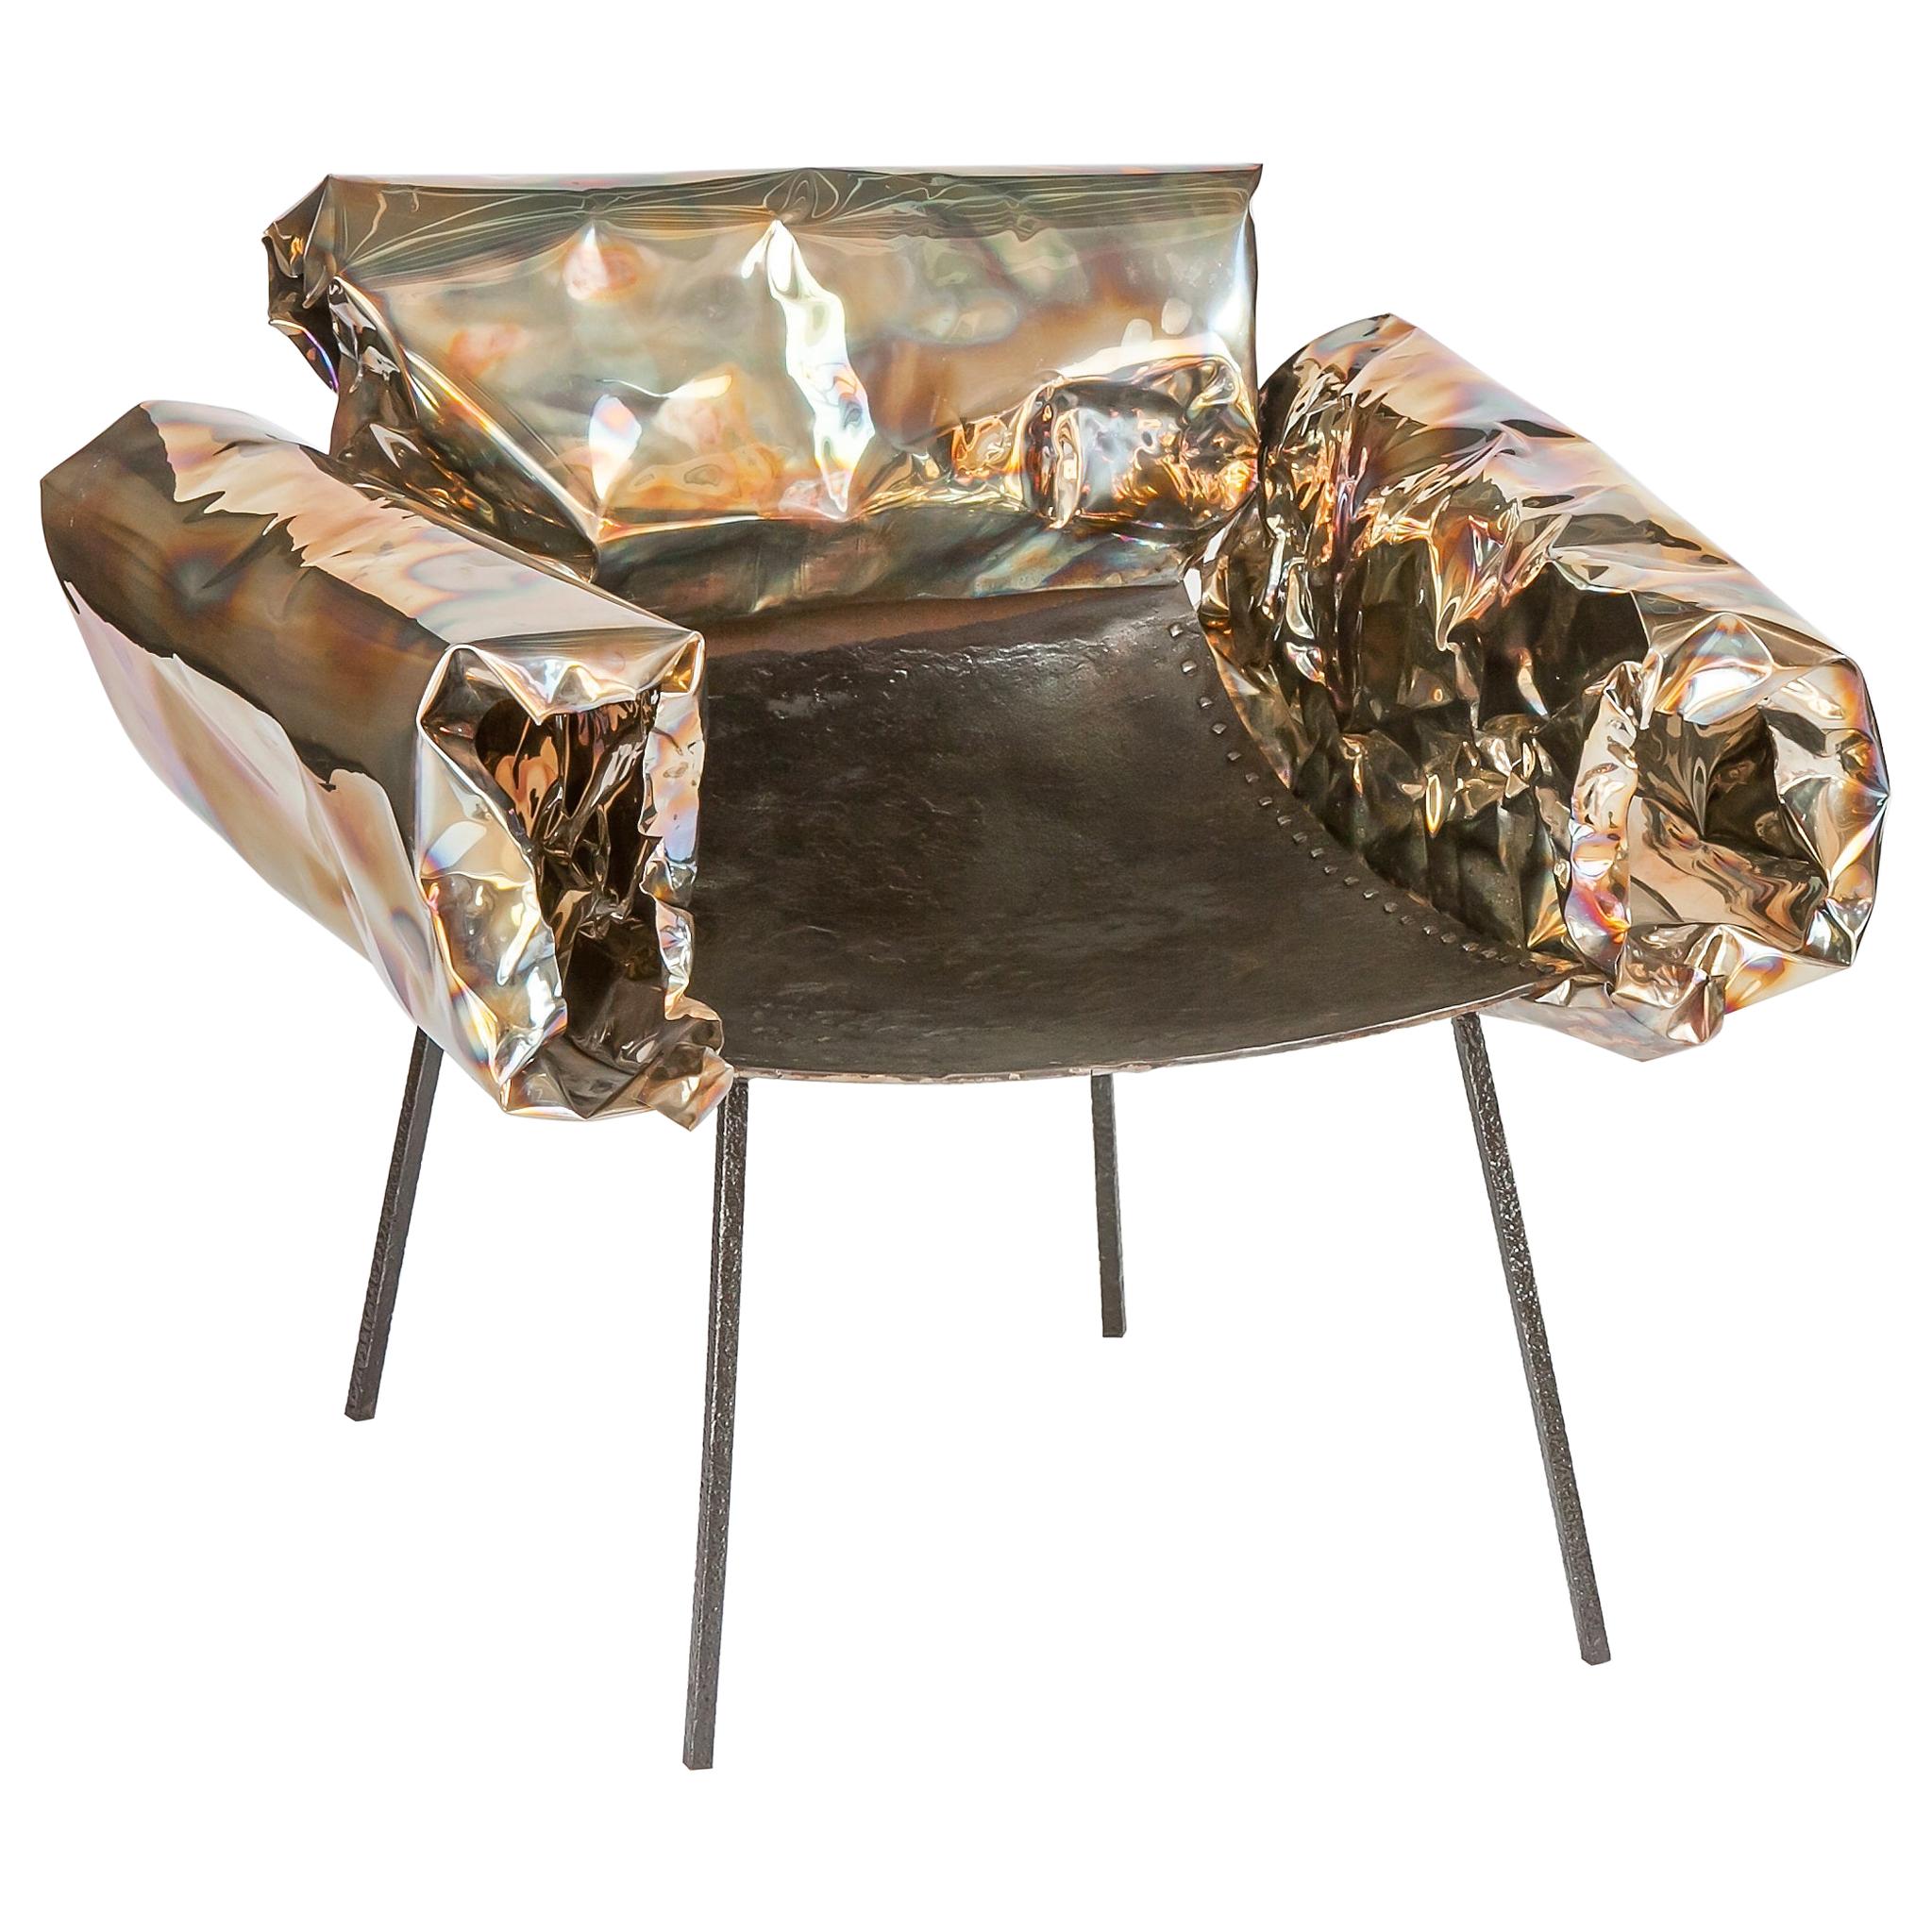 Handmade Stainless Steel Sculptural Armchair by Anadora Lupo